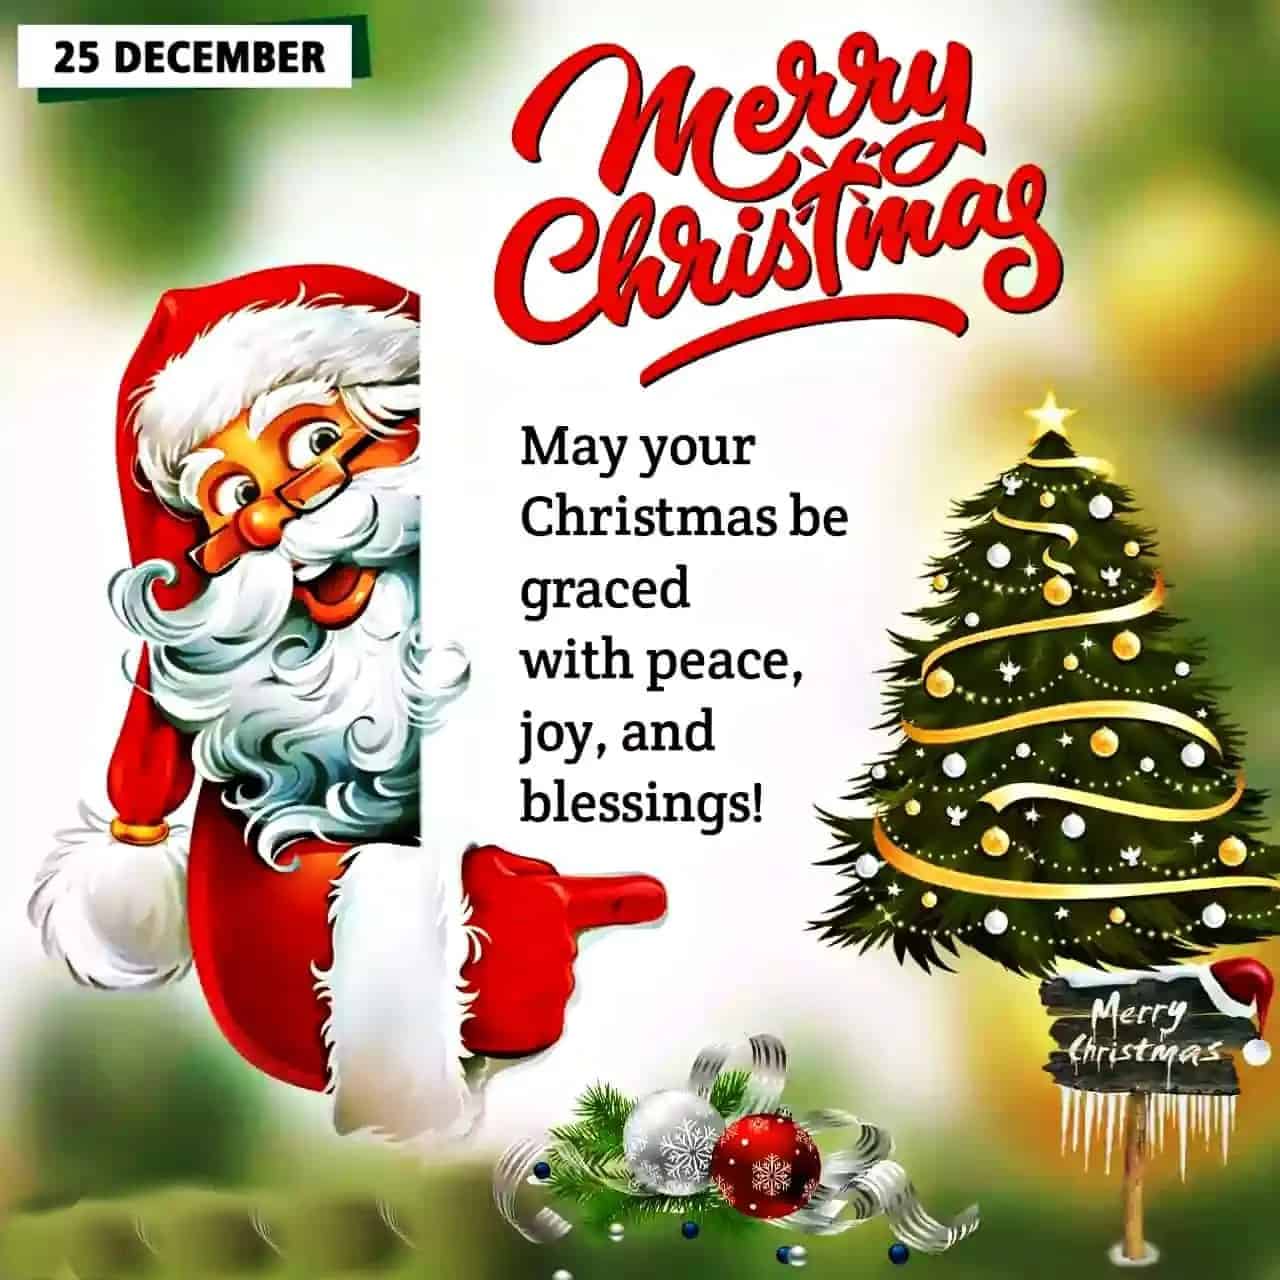 Merry Christmas Greetings For Colleagues